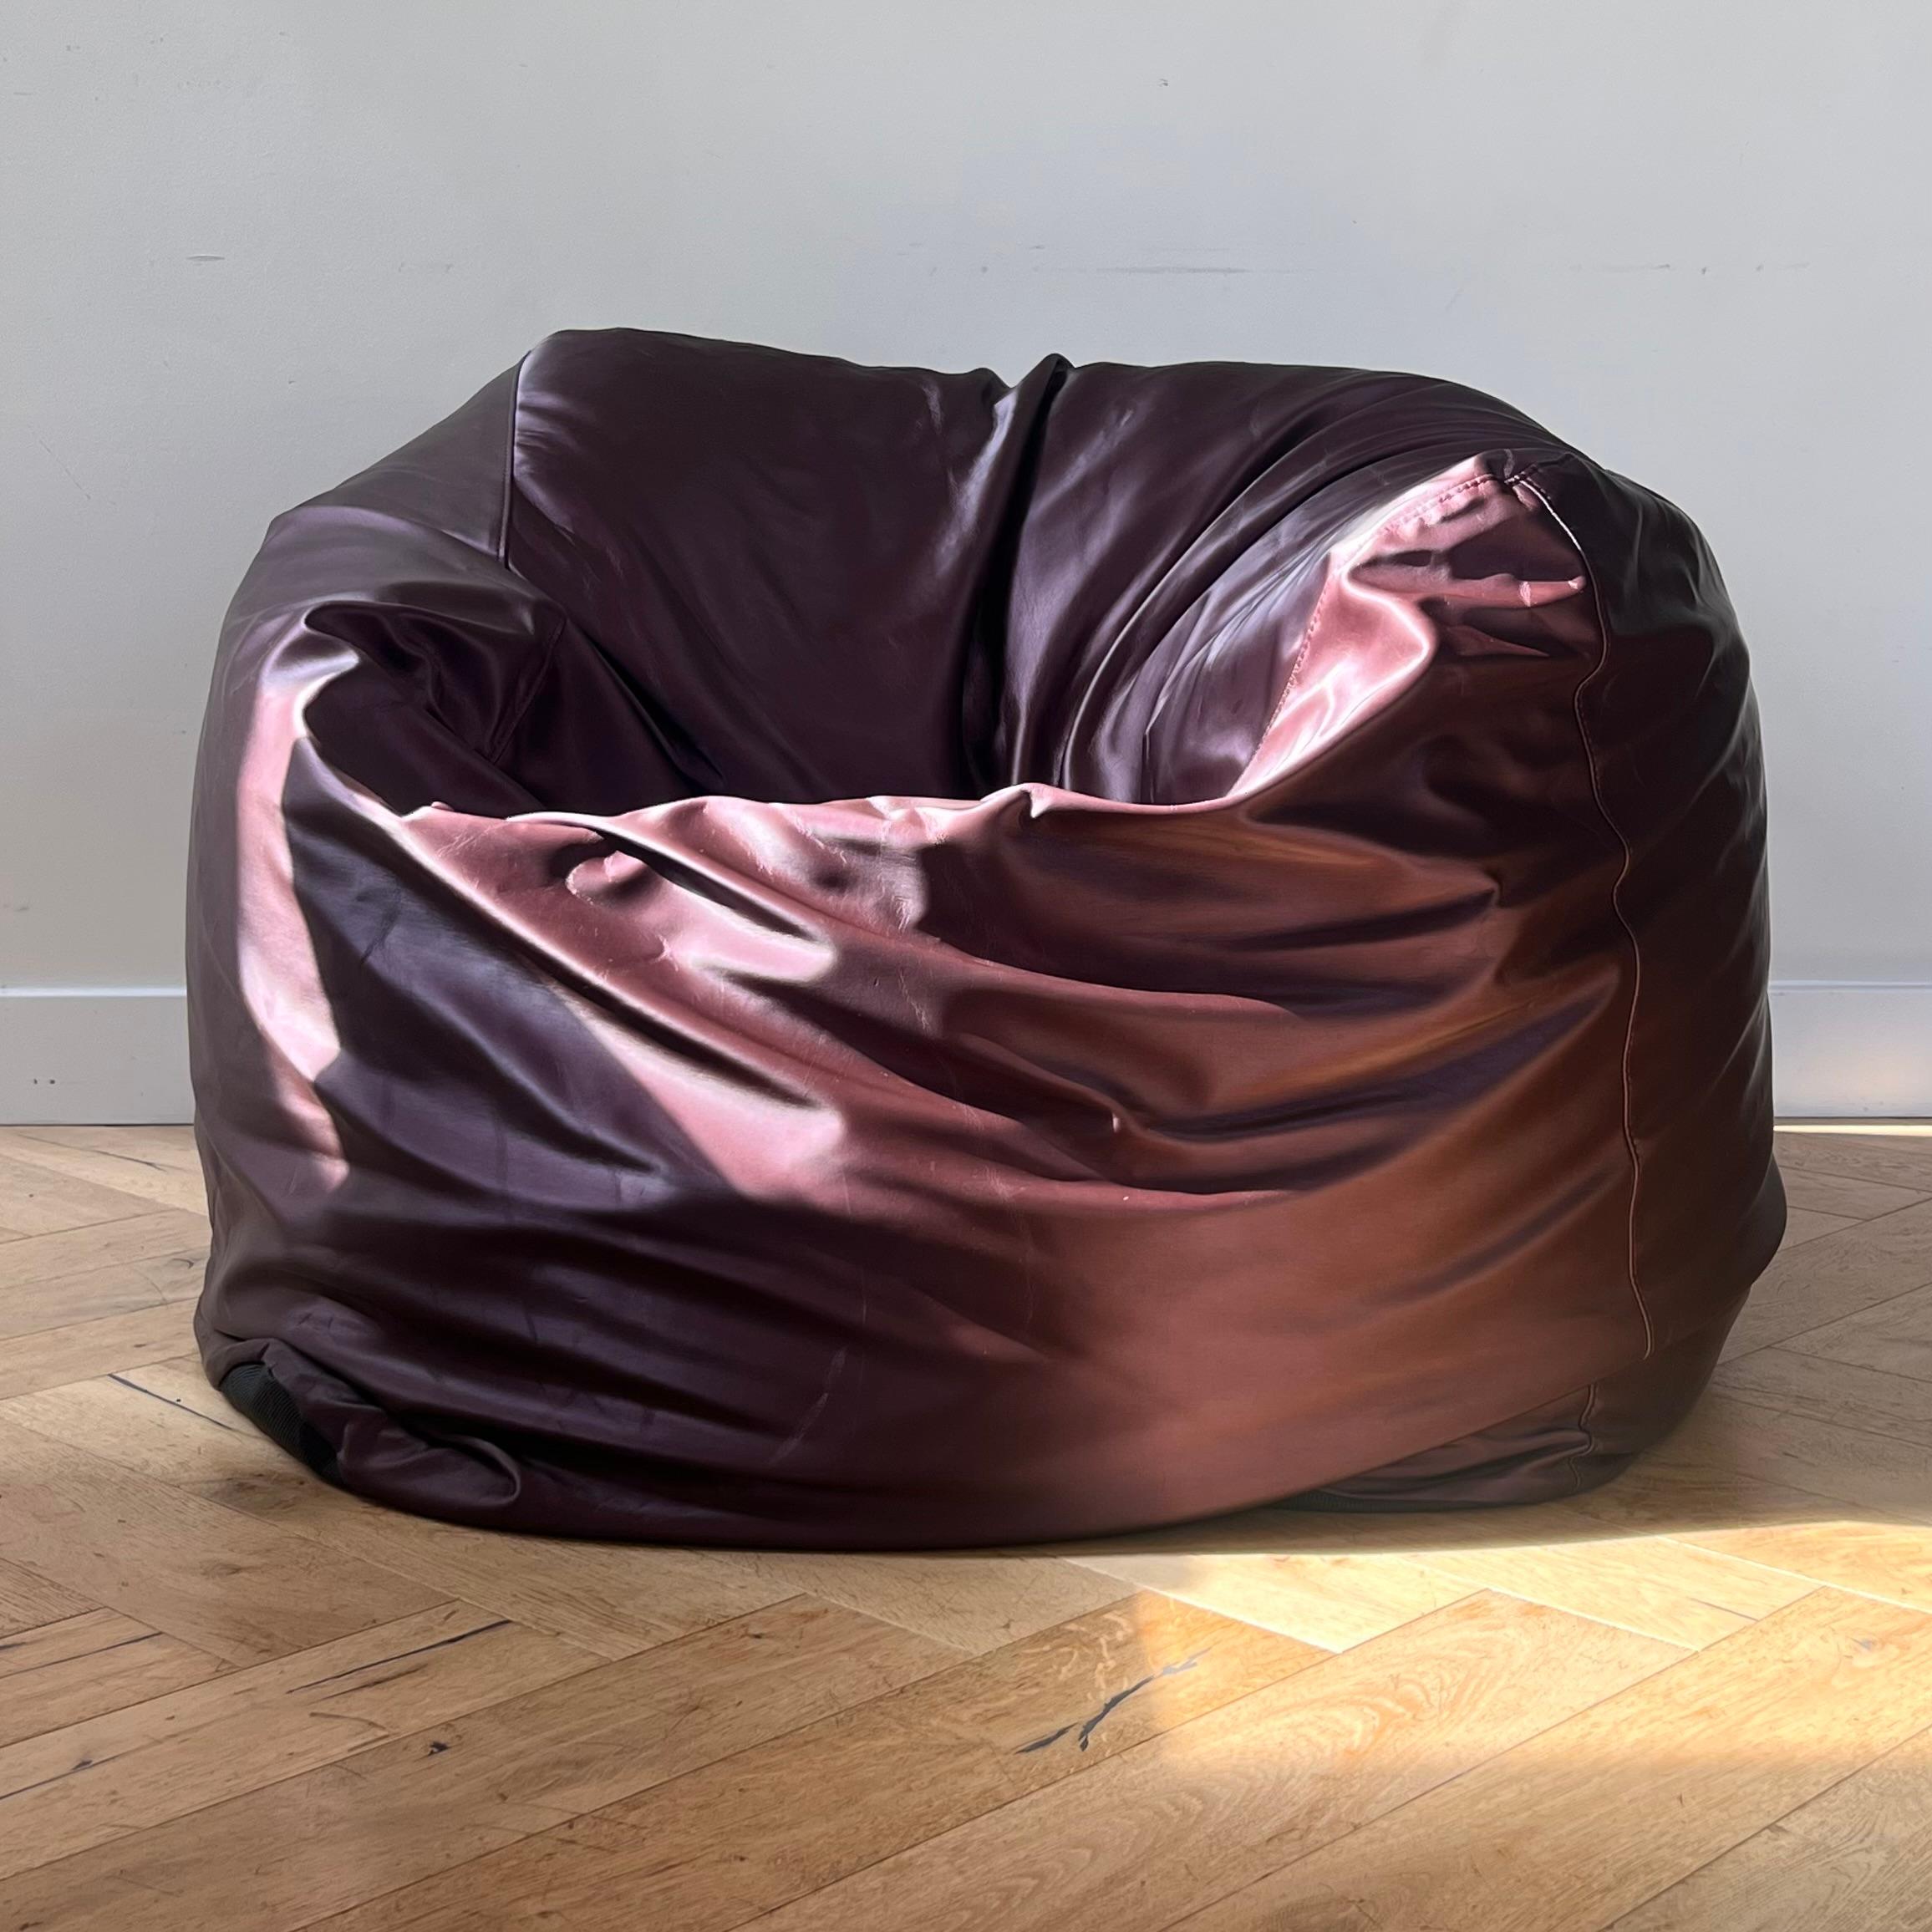 An iridescent eggplant purple vinyl beanbag chair by Ligne Roset, made in France early 21st century. Of amorphous cube shape with textured gripping underside. With tag. Pick up in central west Los Angeles or we ship worldwide.
40